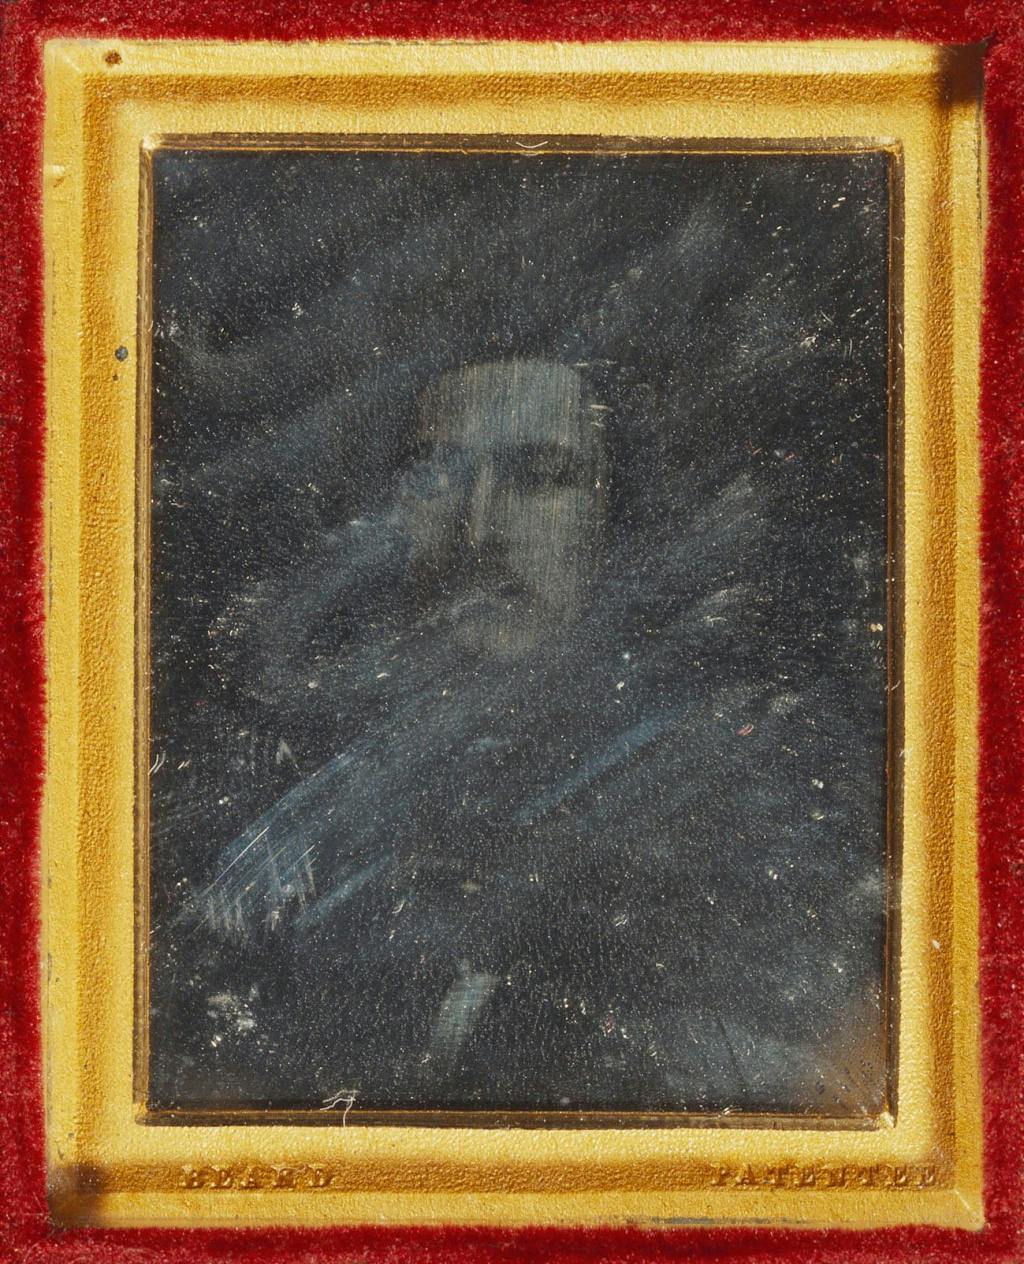 Prince Albert (1819-1861) by WILLIAM CONSTABLE (1783-1861)

Daguerreotype, showing a head-and-shoulders portrait of Prince Albert looking slightly to the left. The image has now faded considerably. The daguerreotype is mounted in a dark brown leather case with a red velvet interior. 'P. A. Feb 1842' is embossed on the lid in gold lettering and 'Beard Patented' is stamped beneath the daguerreotype.